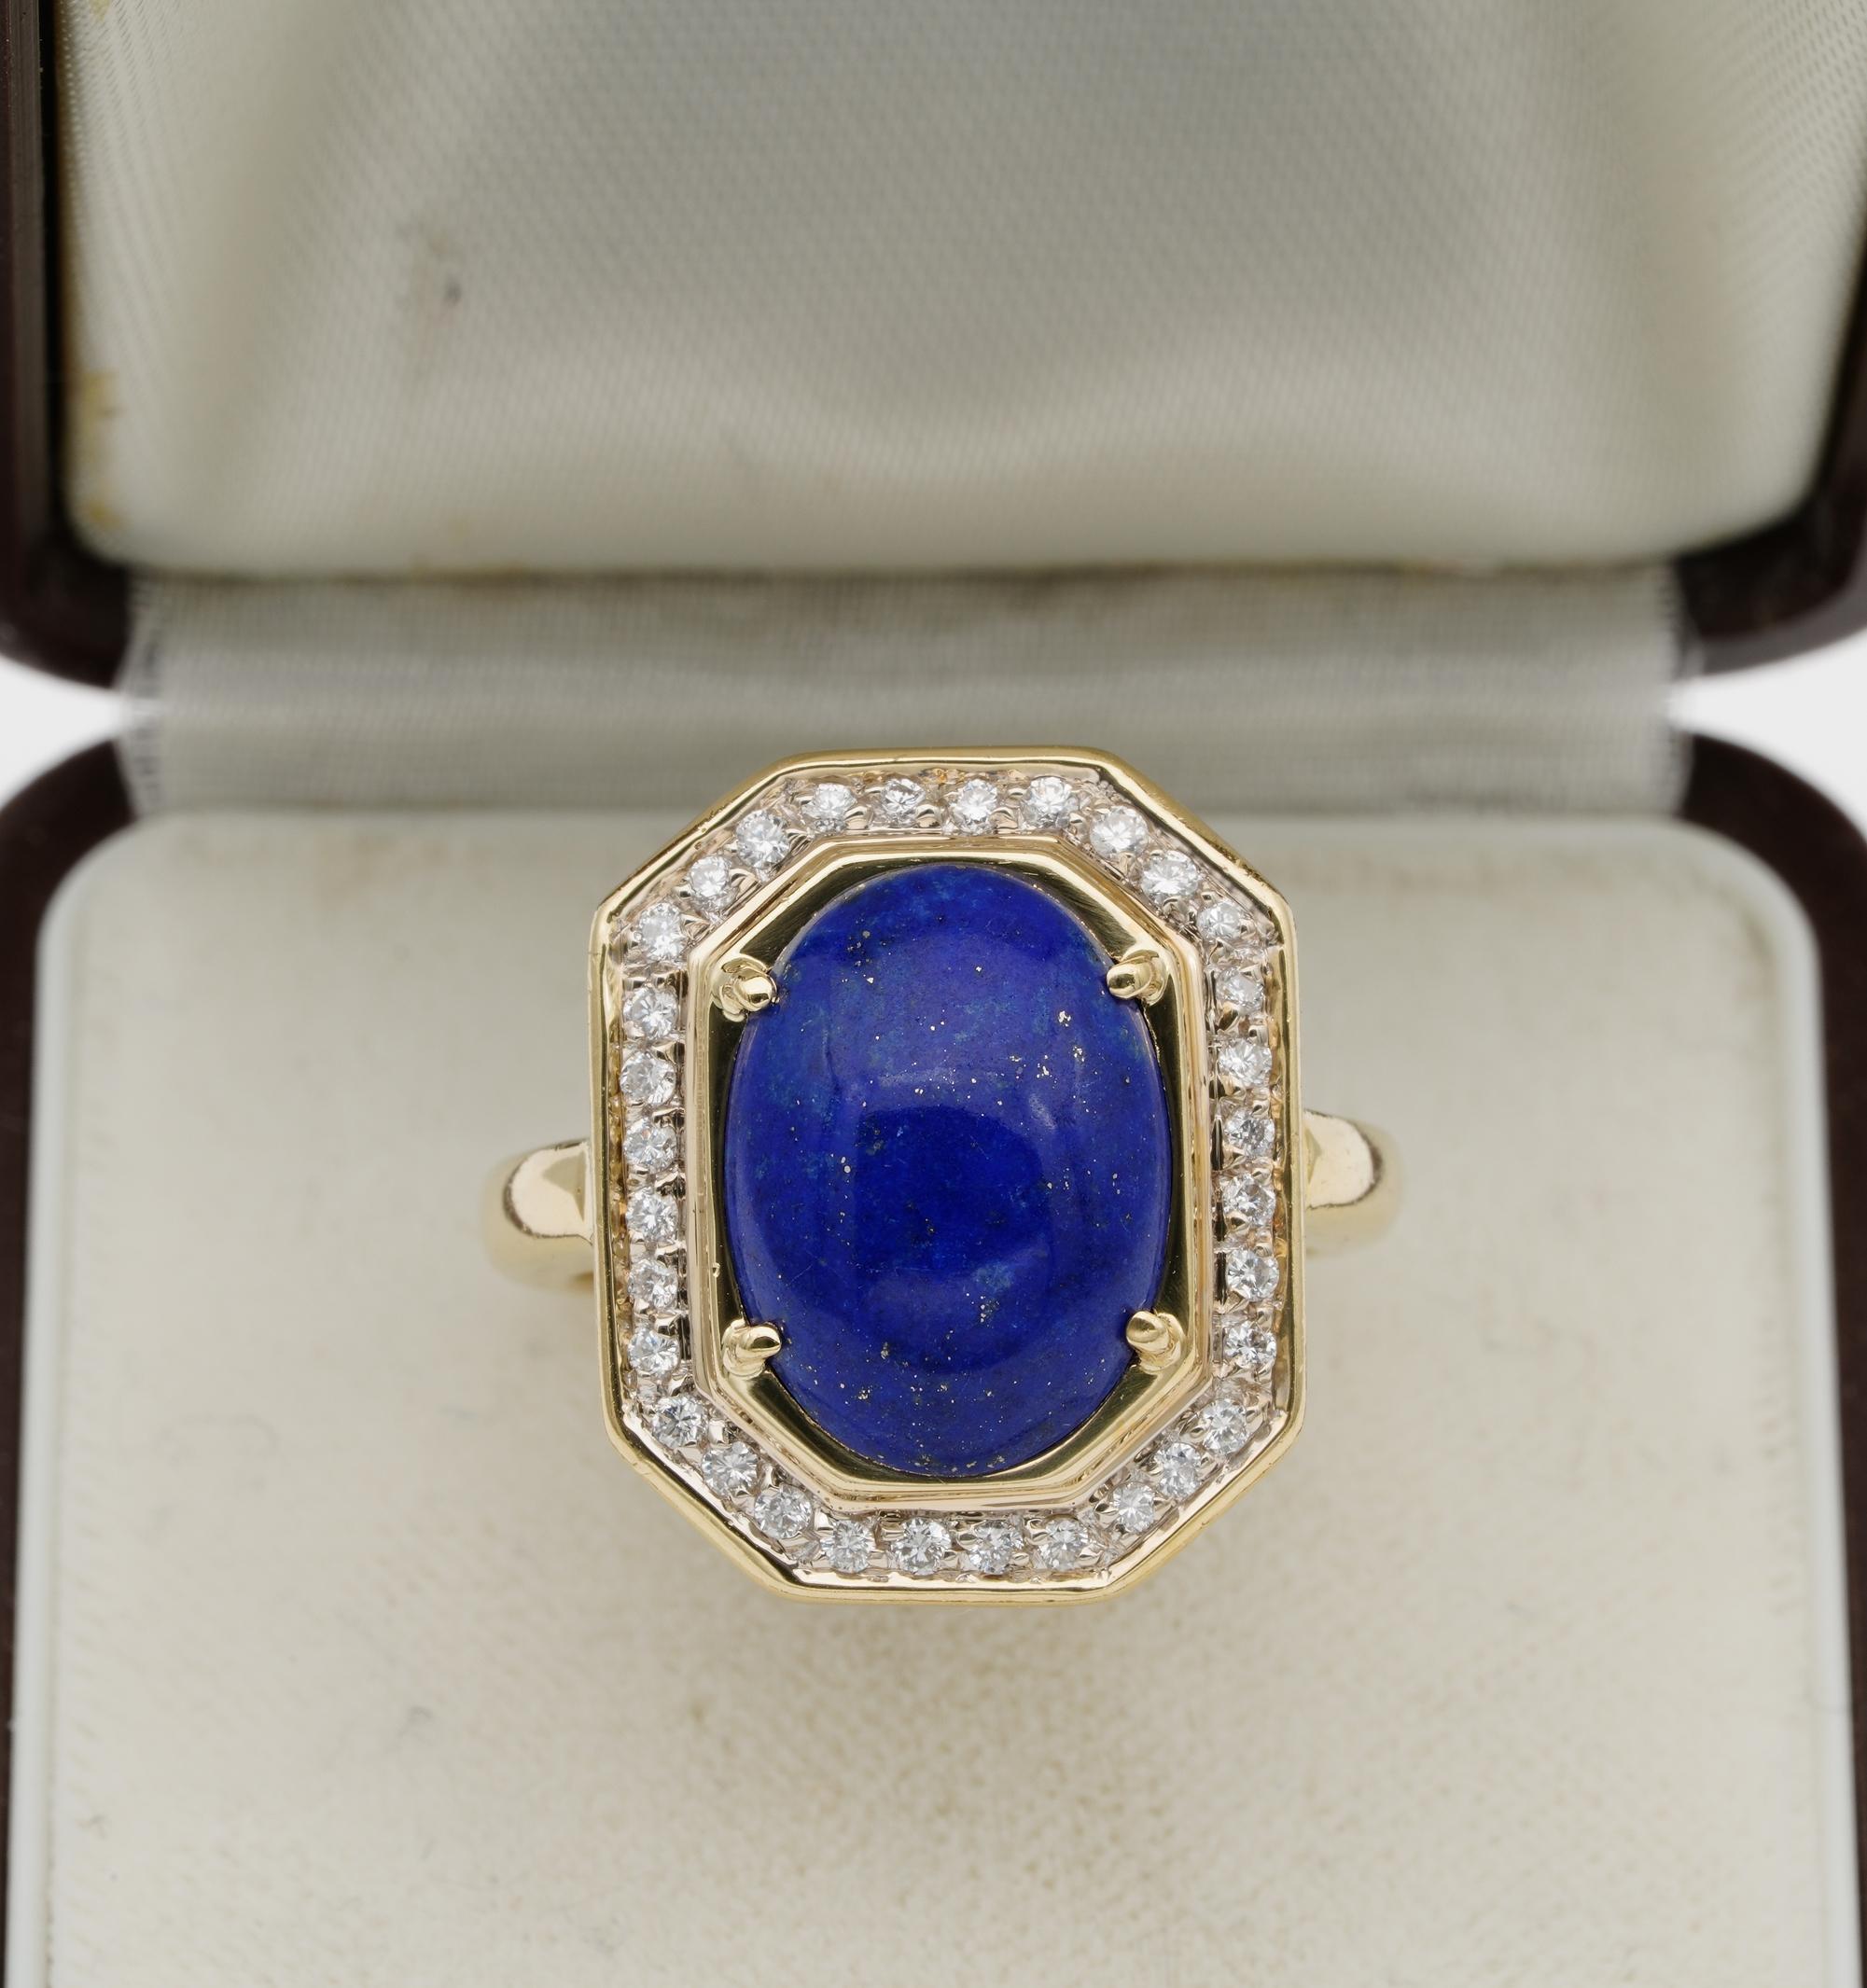 The Stone Of History

An incredible stone found in human history since the beginning of time, Lapis has attracted human kind for its stunning colour beauty
This outstanding vintage ring boasts amazing design and fine workmanship